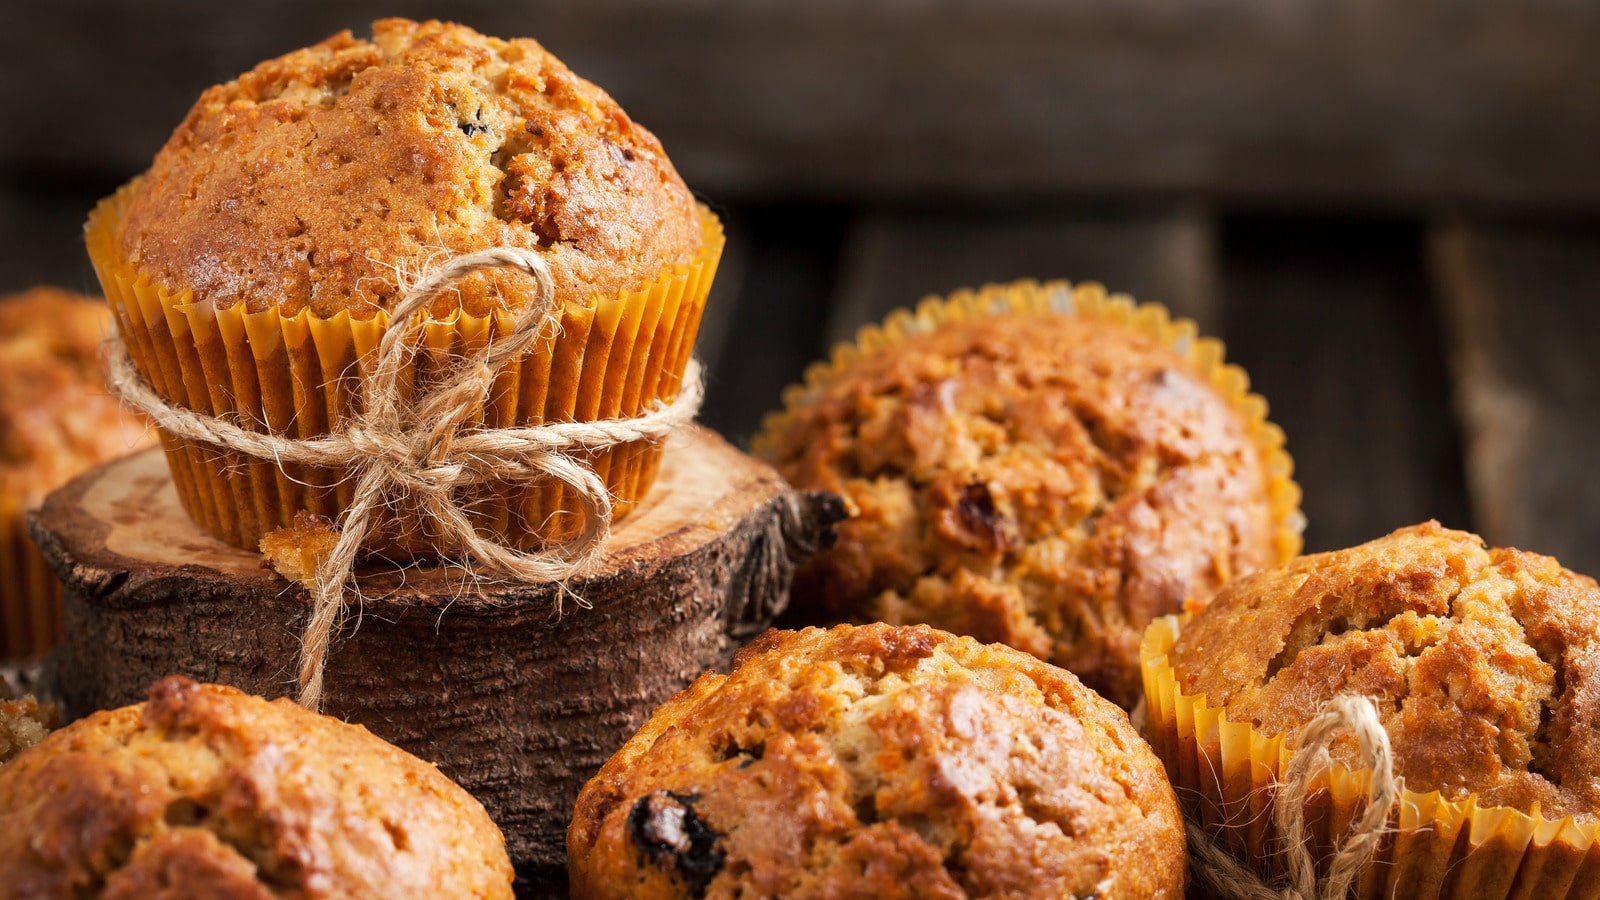 Reviving Stored Muffins